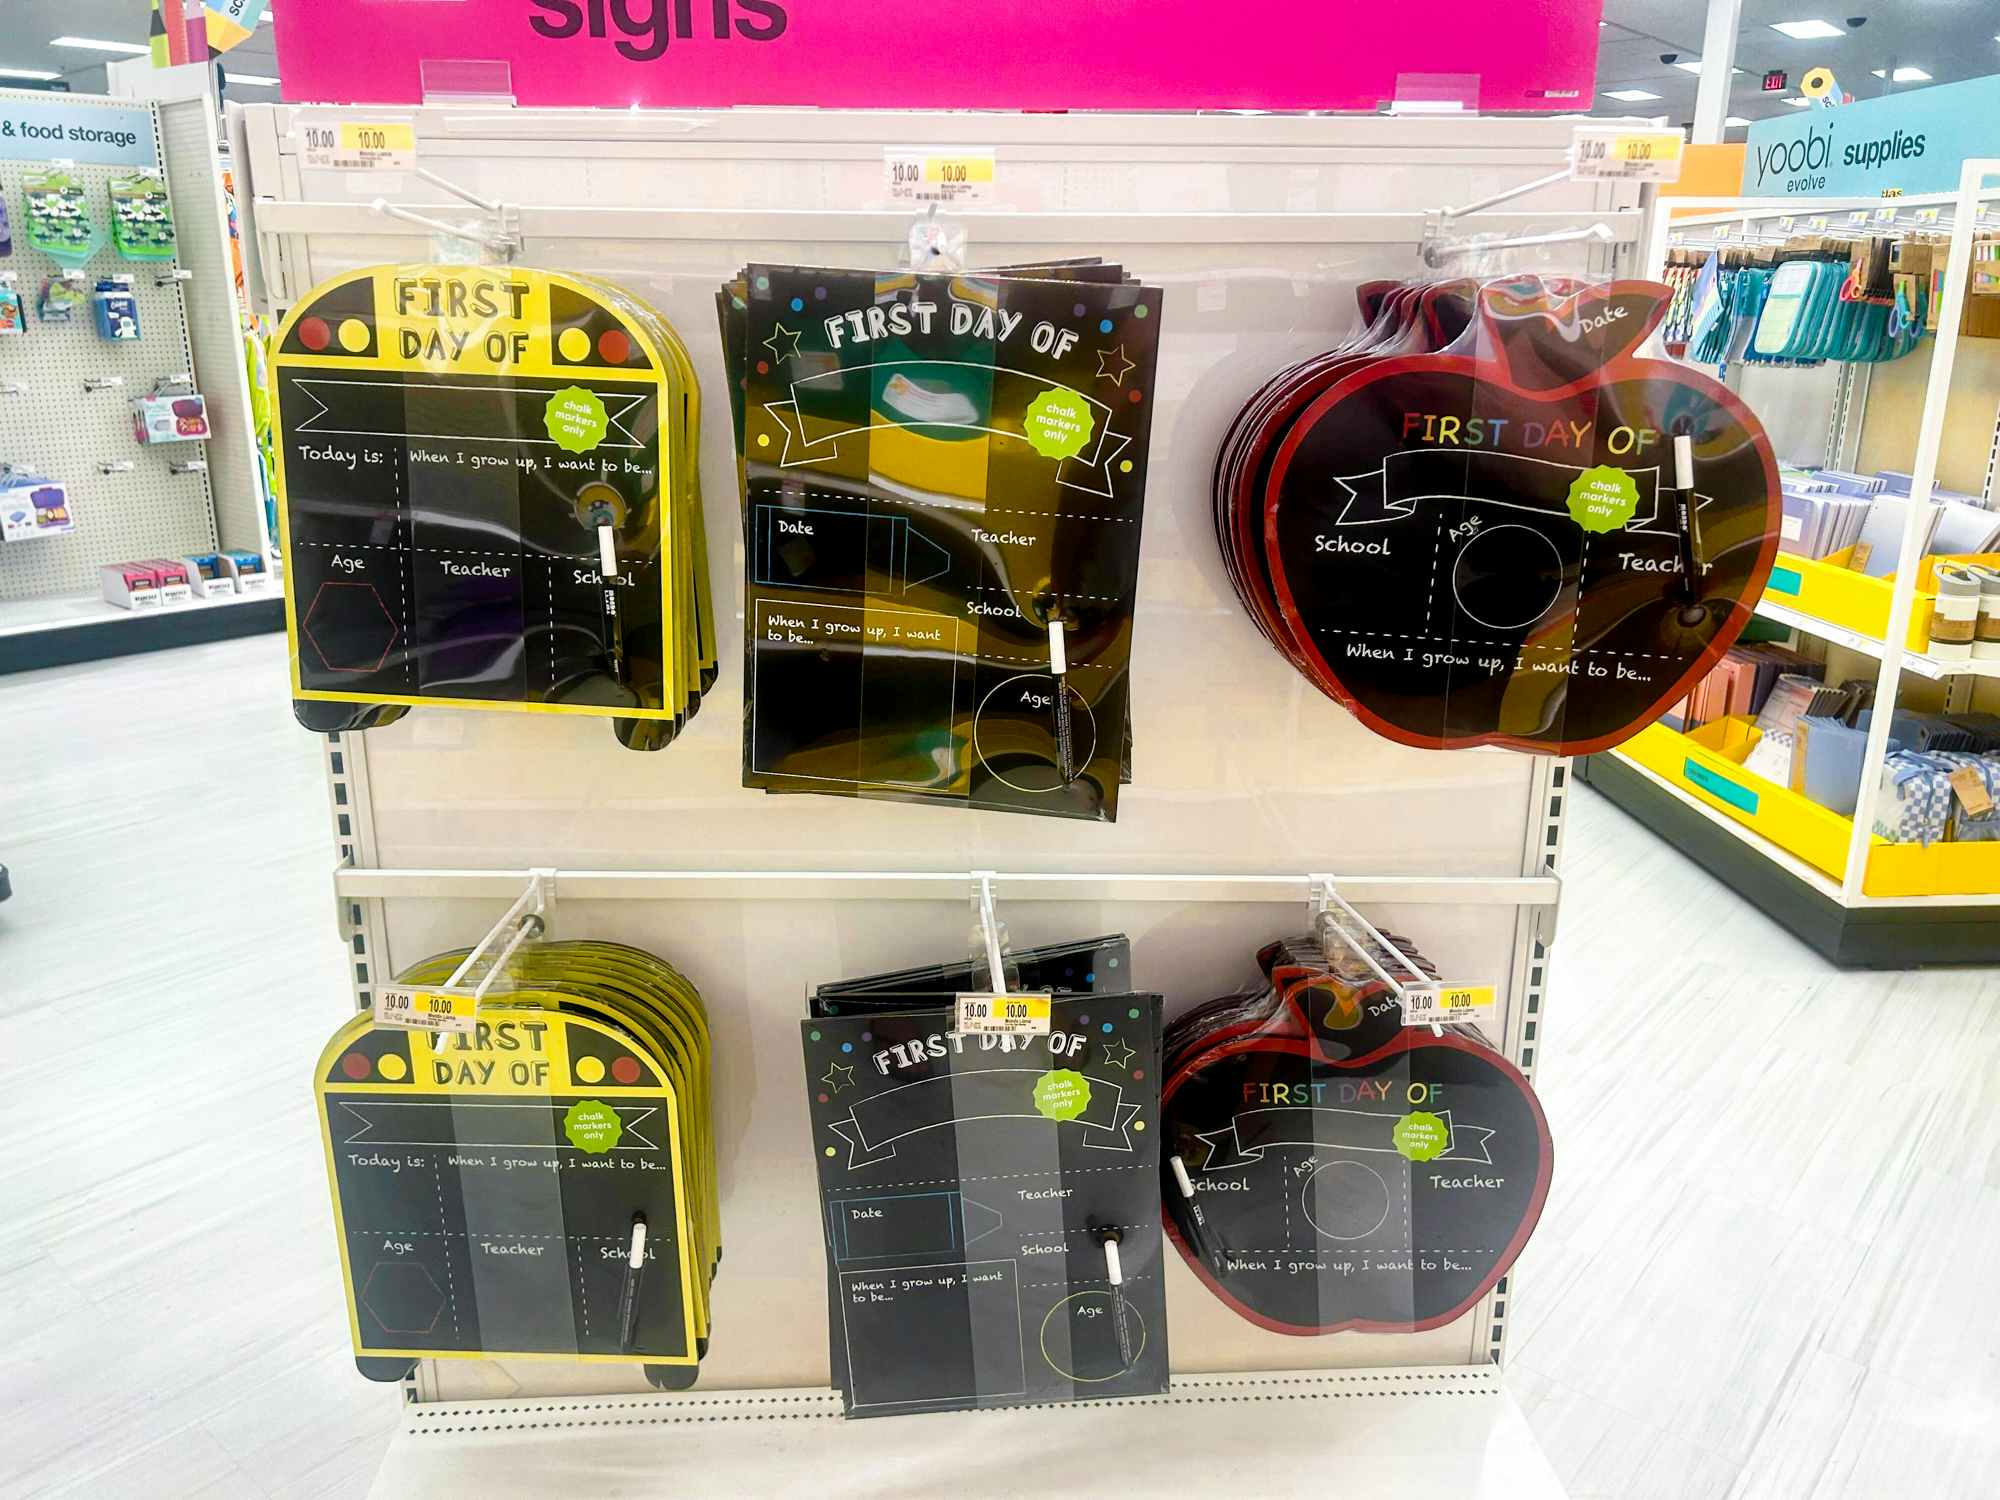 Some First Day of School signs stocked at Target